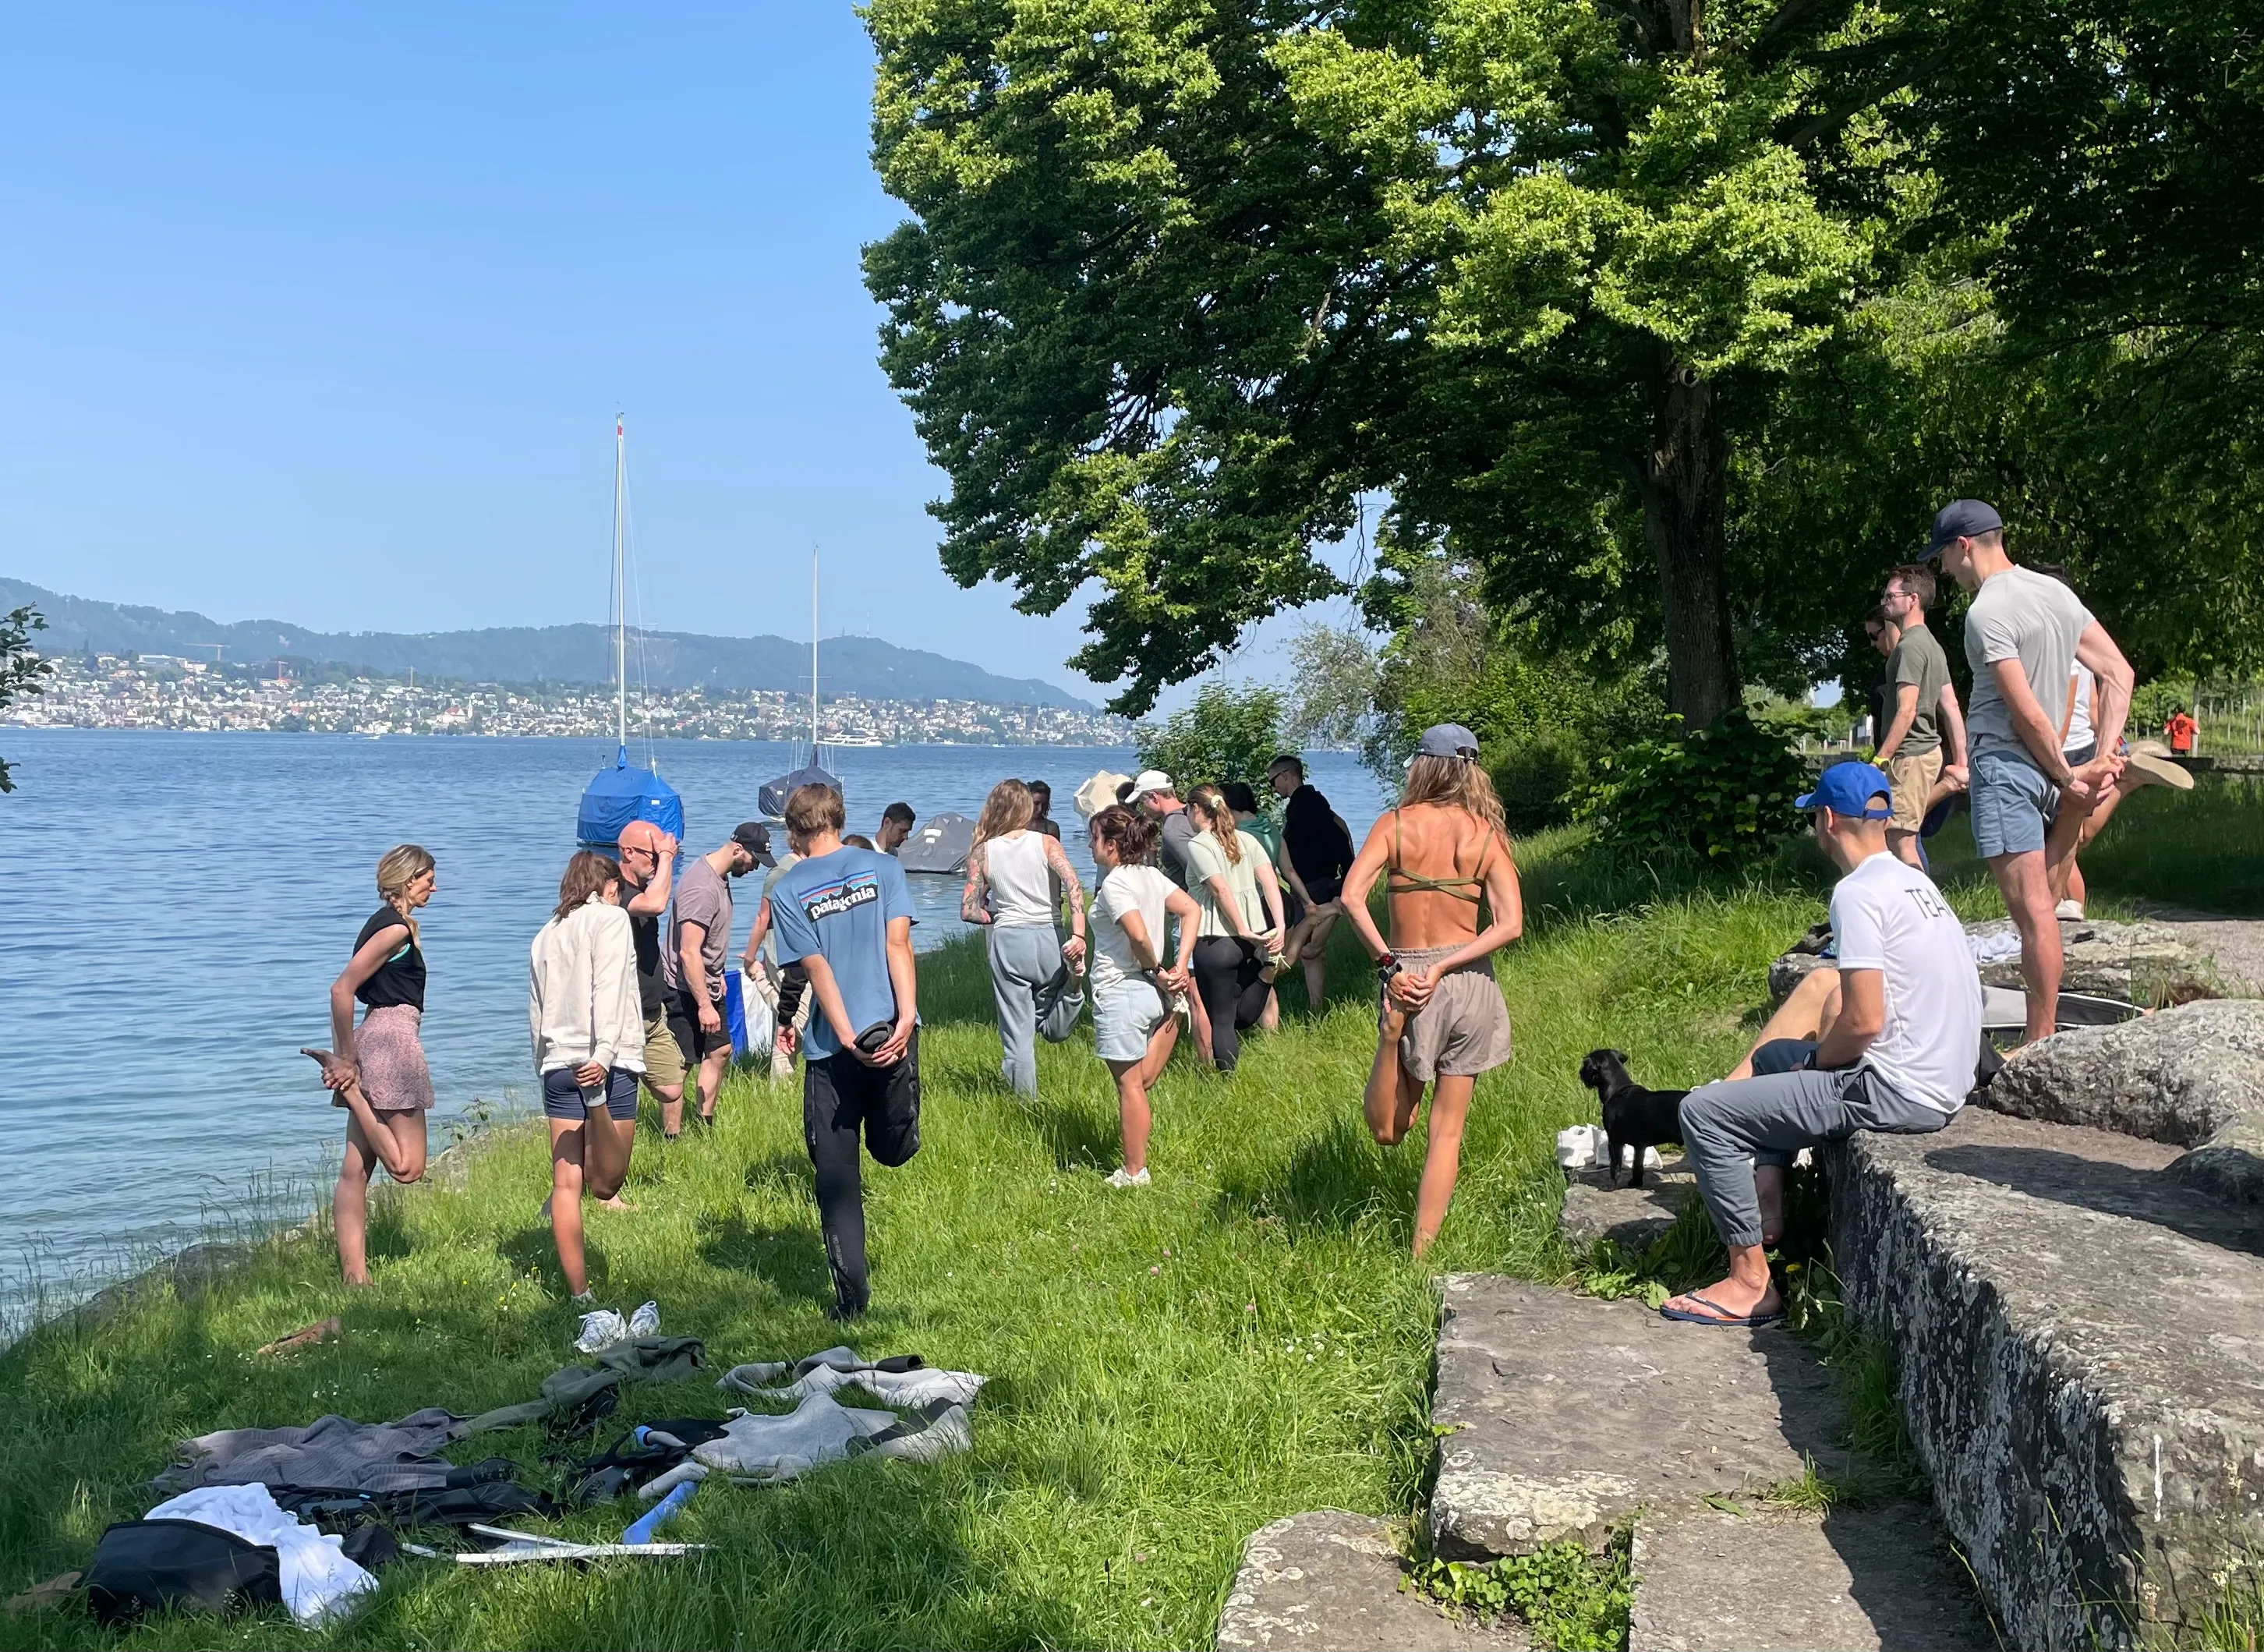 Freedivers stretching before diving in the lake in Zurich, Switzerland.